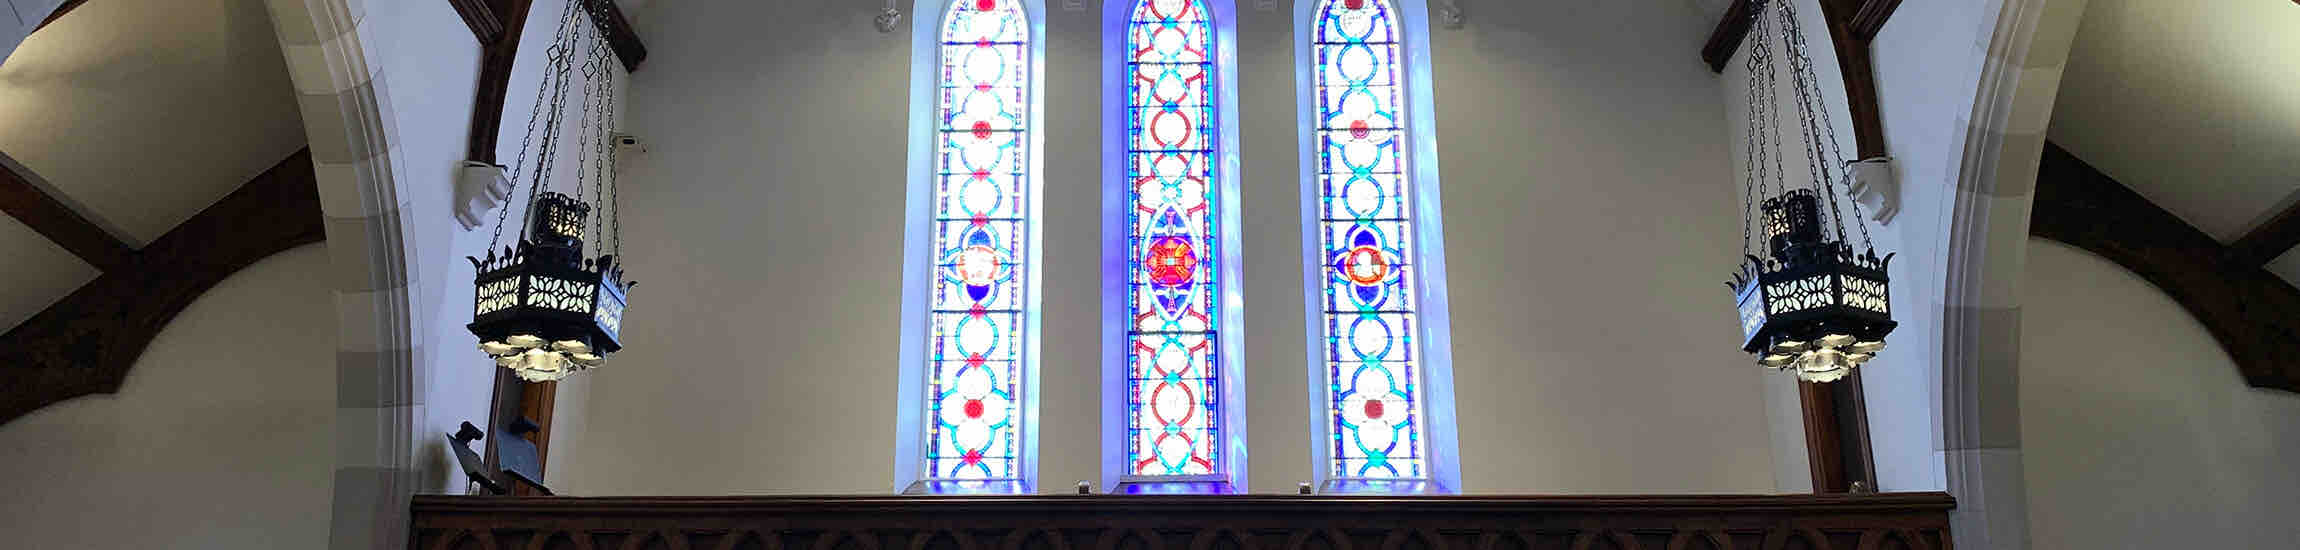 Sanctuary balcony and west stained glass windows